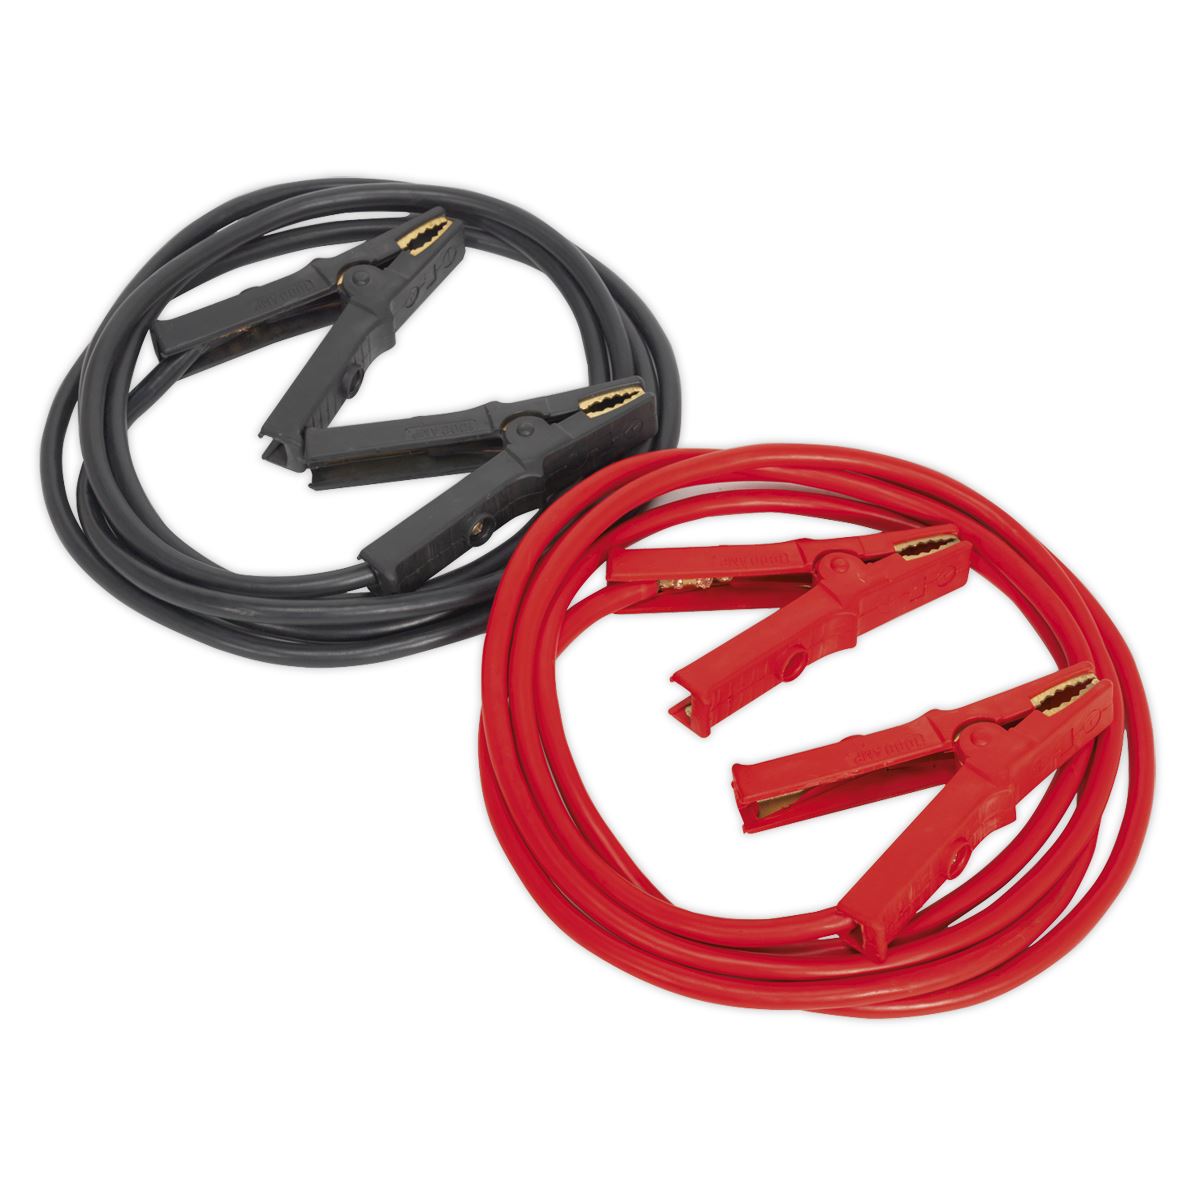 Sealey Heavy-Duty Booster Cables - 40mm² x 5m 600A